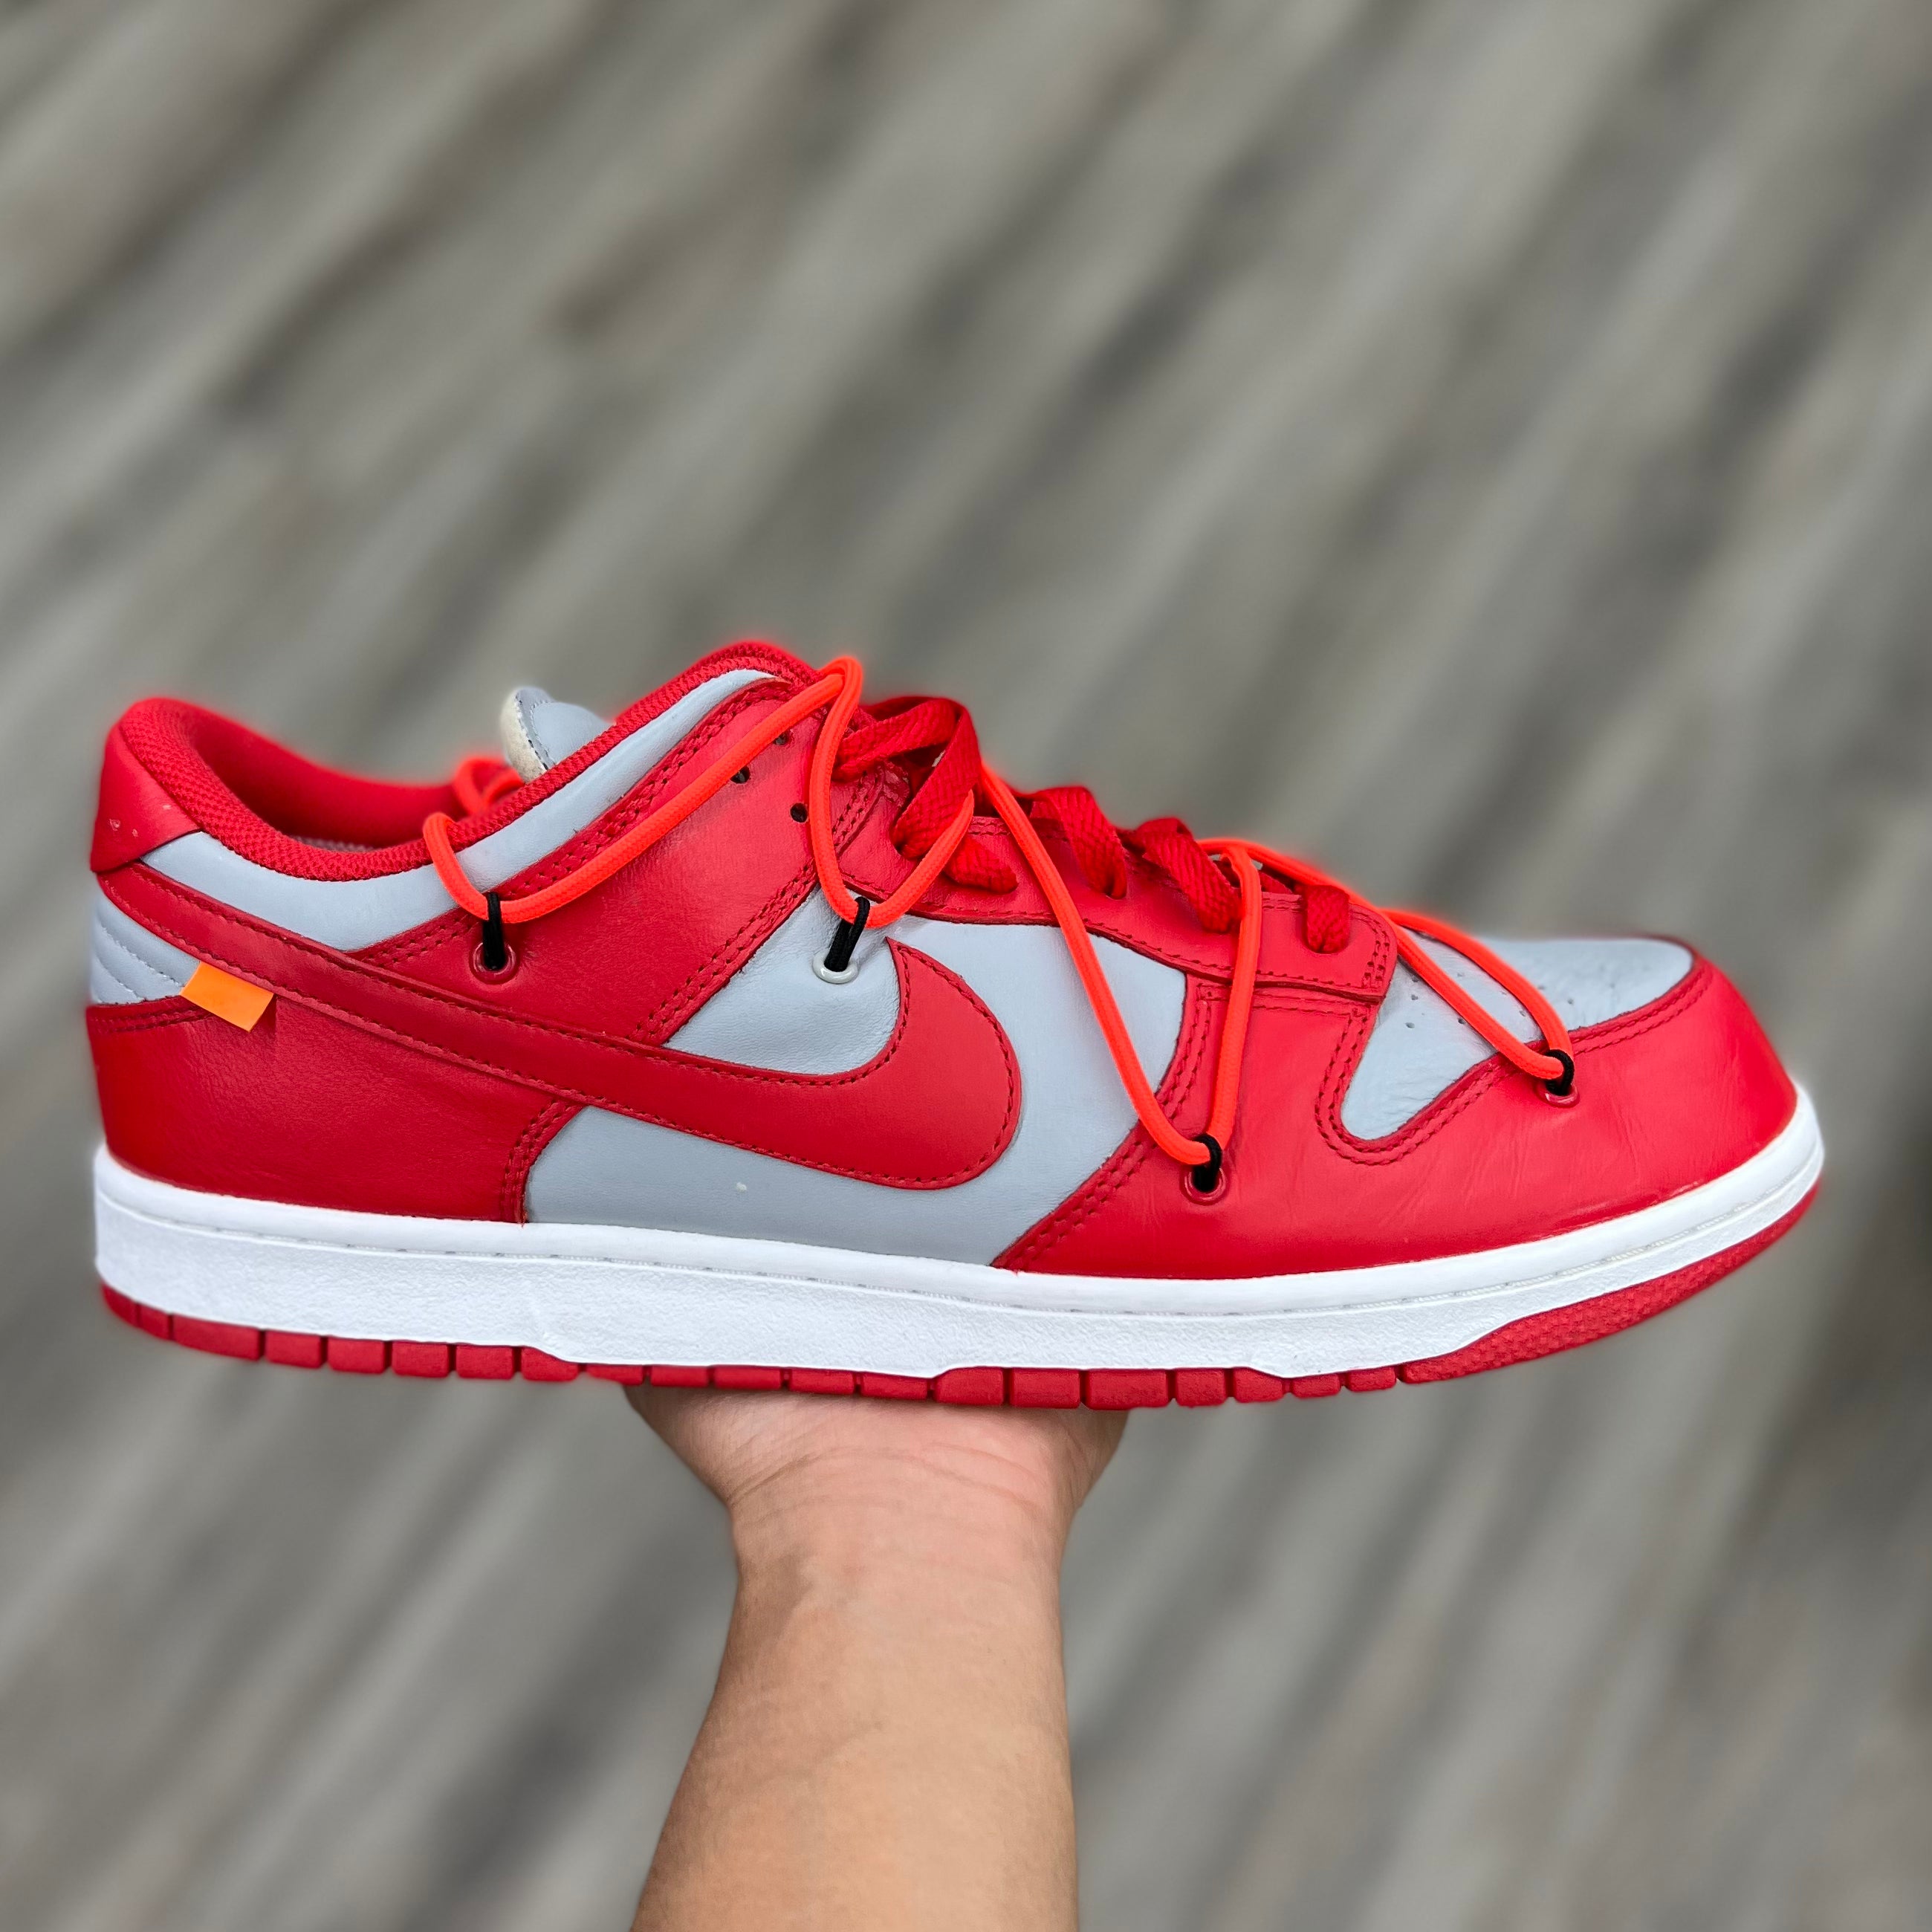 Nike Dunk Low “Off White University Red” | Request